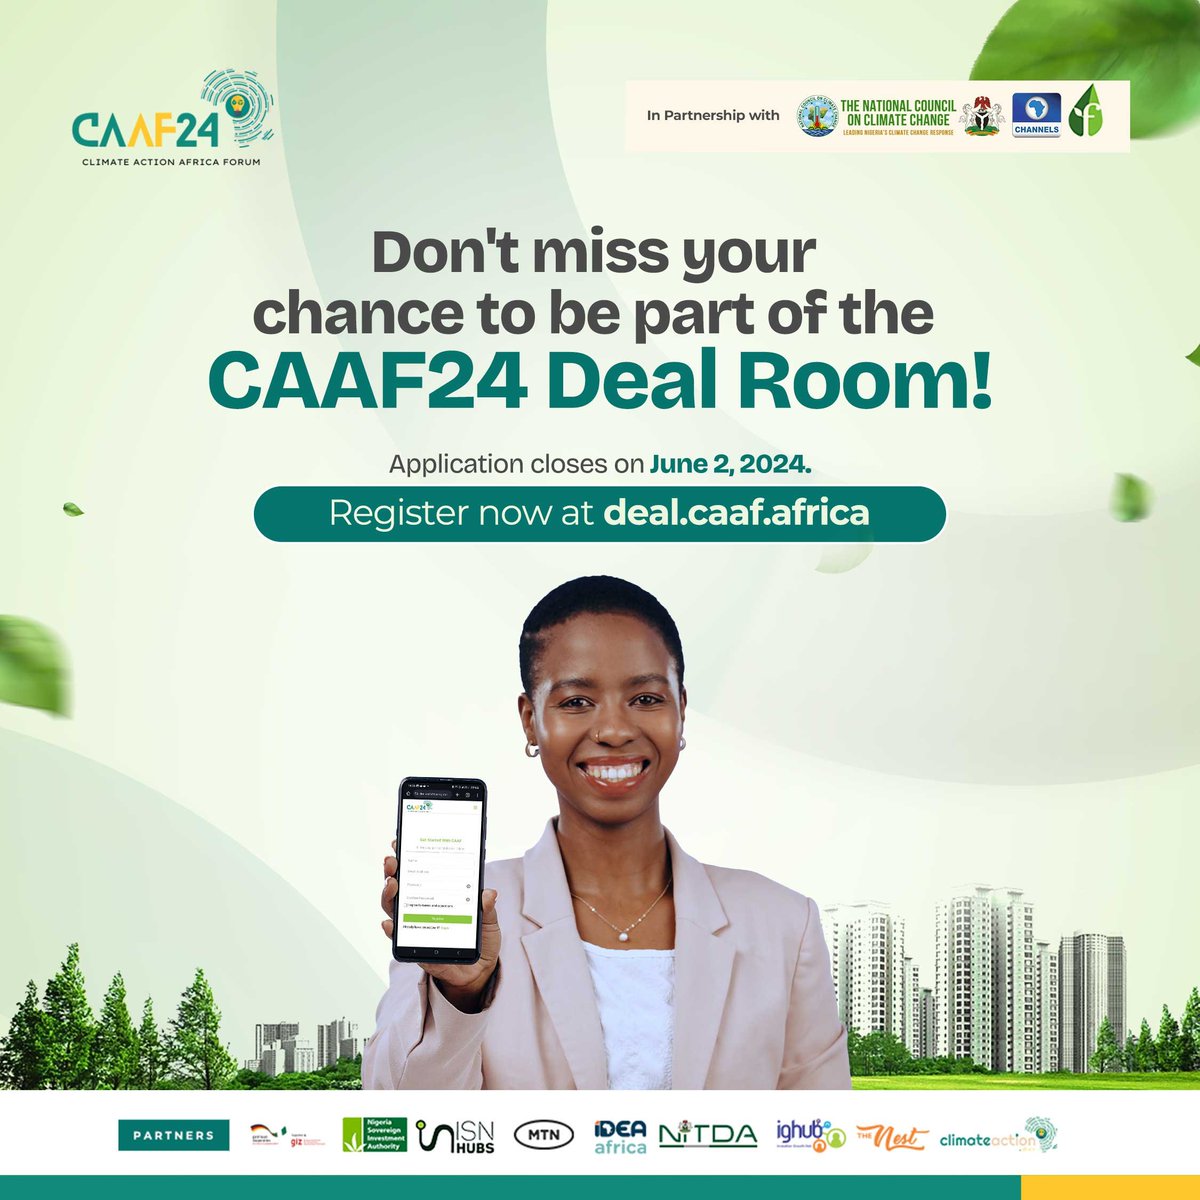 Investors await!
.
CAAF24 Deal Room application closes June 2nd. Don't miss out on presenting your climate-tech solution to top investors. 
.
Apply now: deal.caaf.africa
.
.
.

#CAAF24 #ClimateAction #GreenTech 
#ApplyNow #DontMissOut